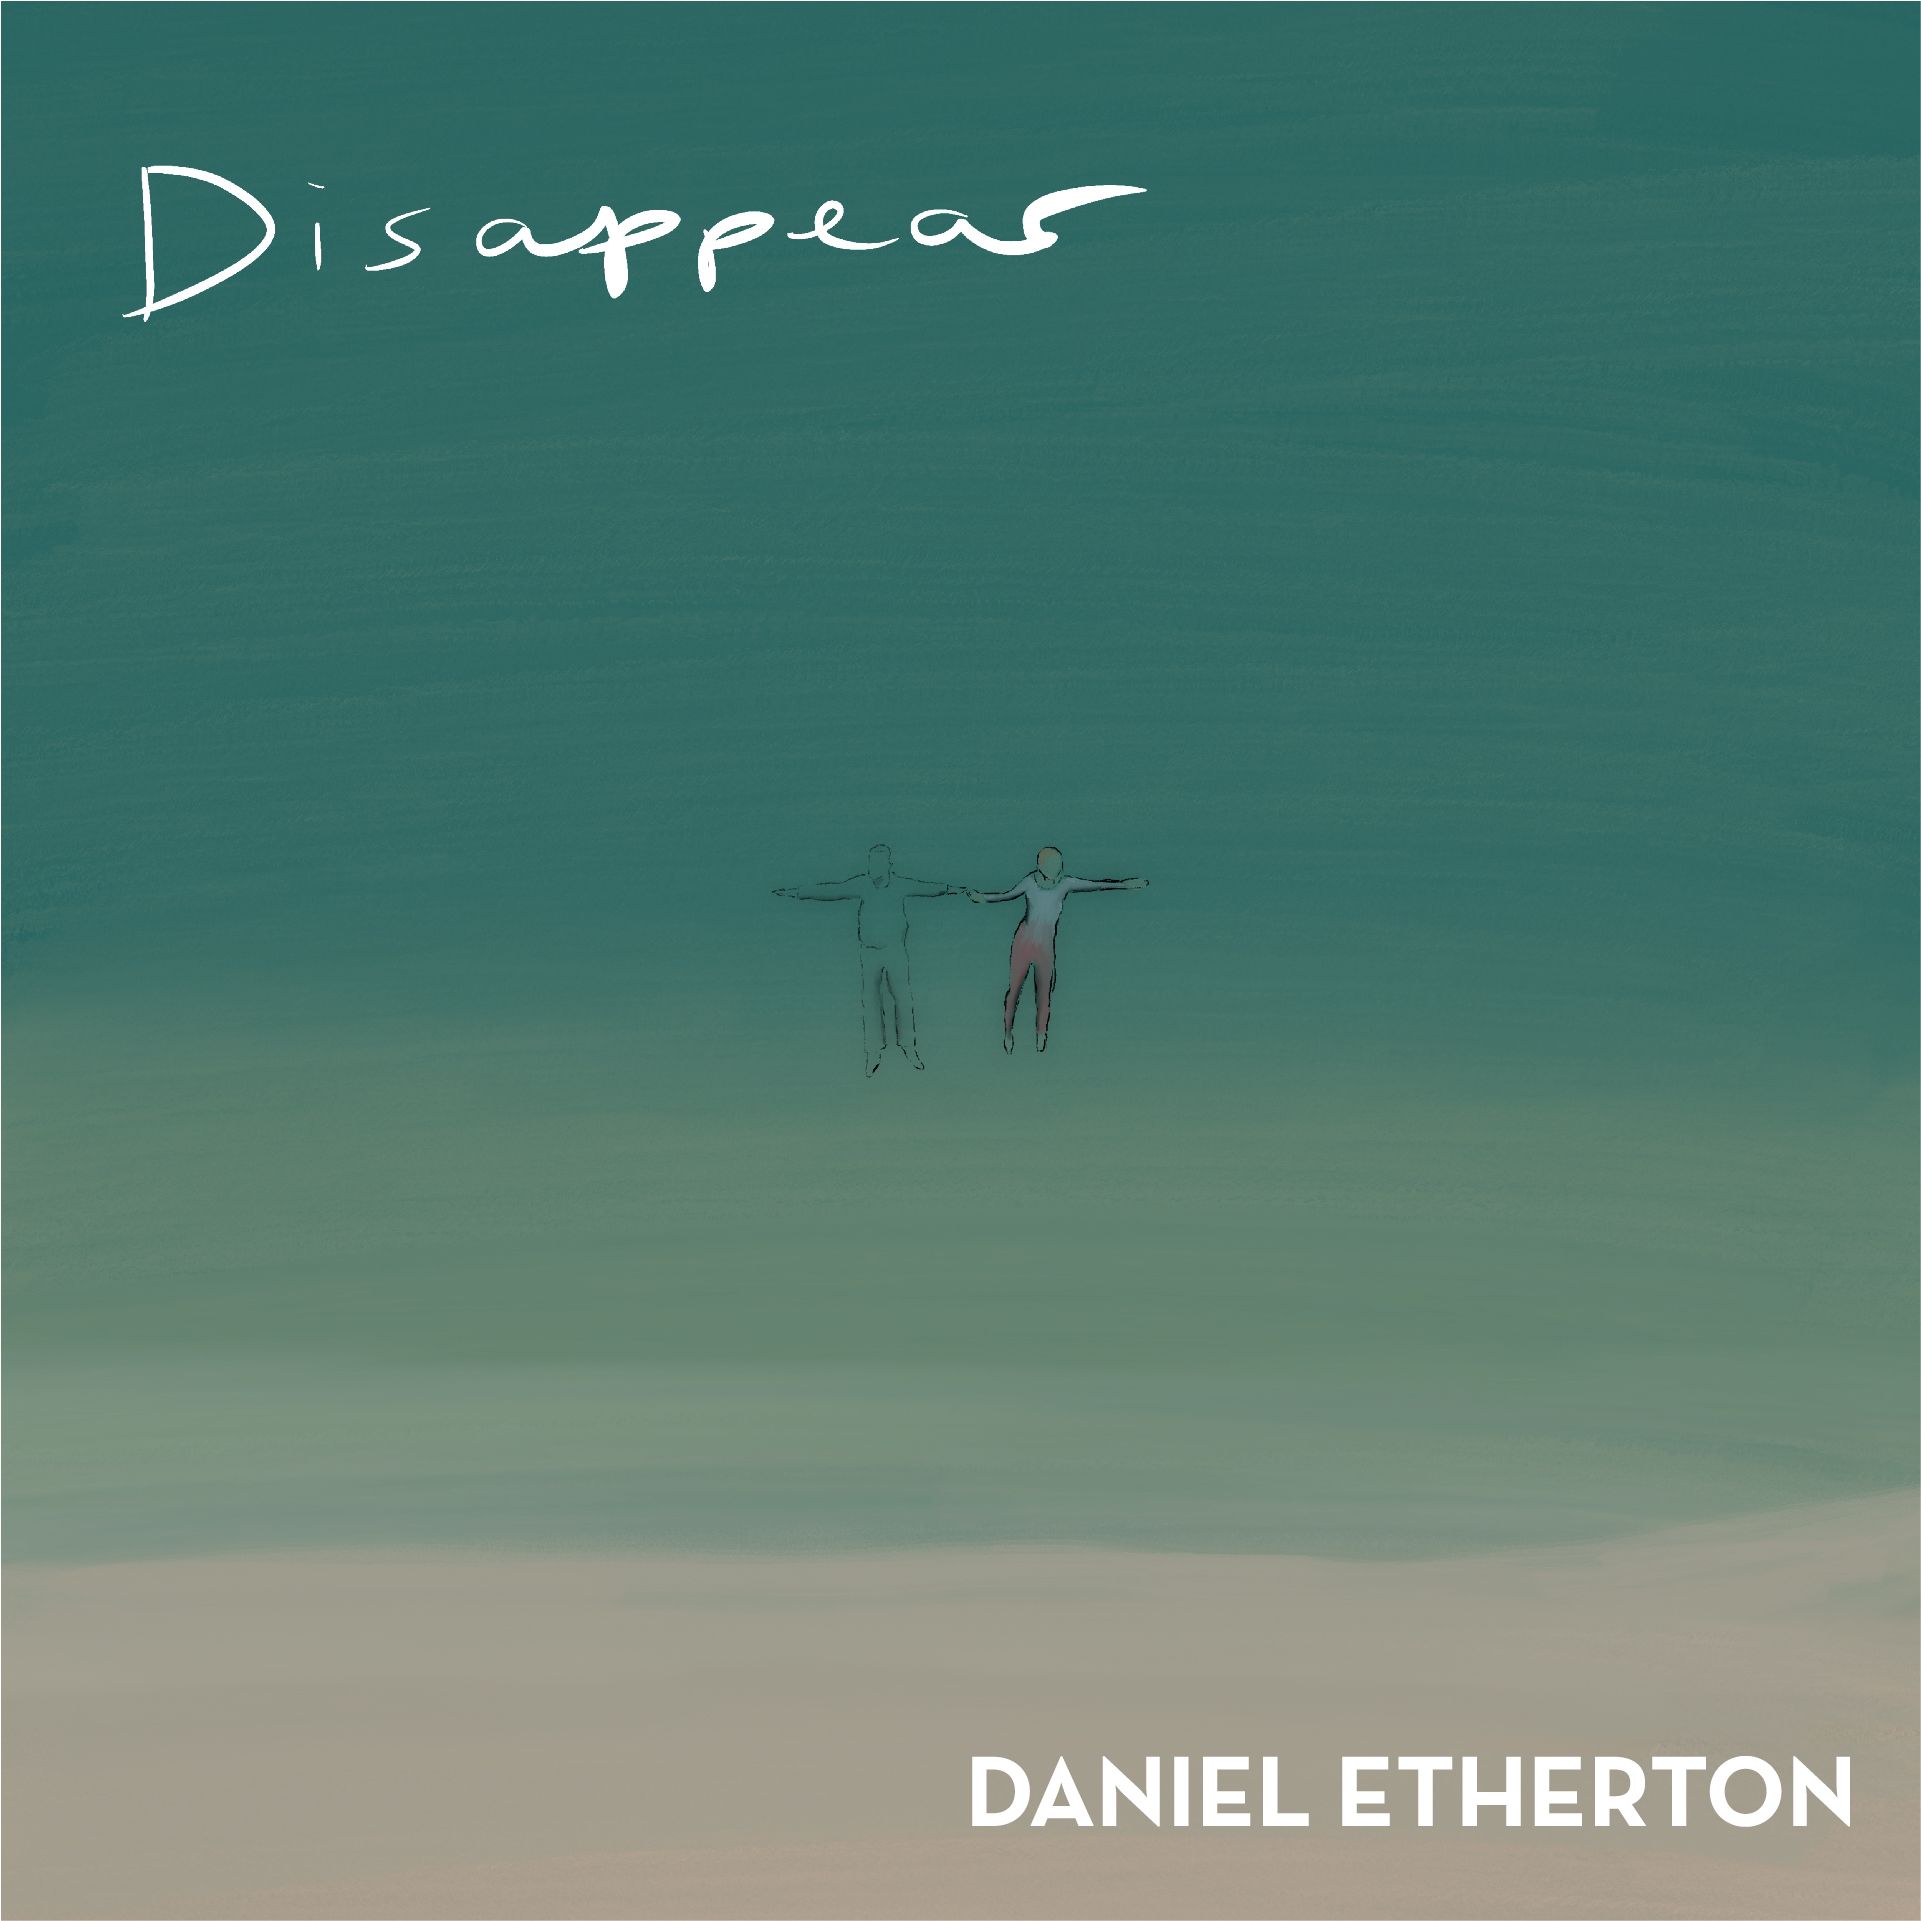 disappear - Daniel Etherton - UK - indie - indie music - indie pop - indie rock - indie folk - new music - music blog - wolf in a suit - wolfinasuit - wolf in a suit blog - wolf in a suit music blog